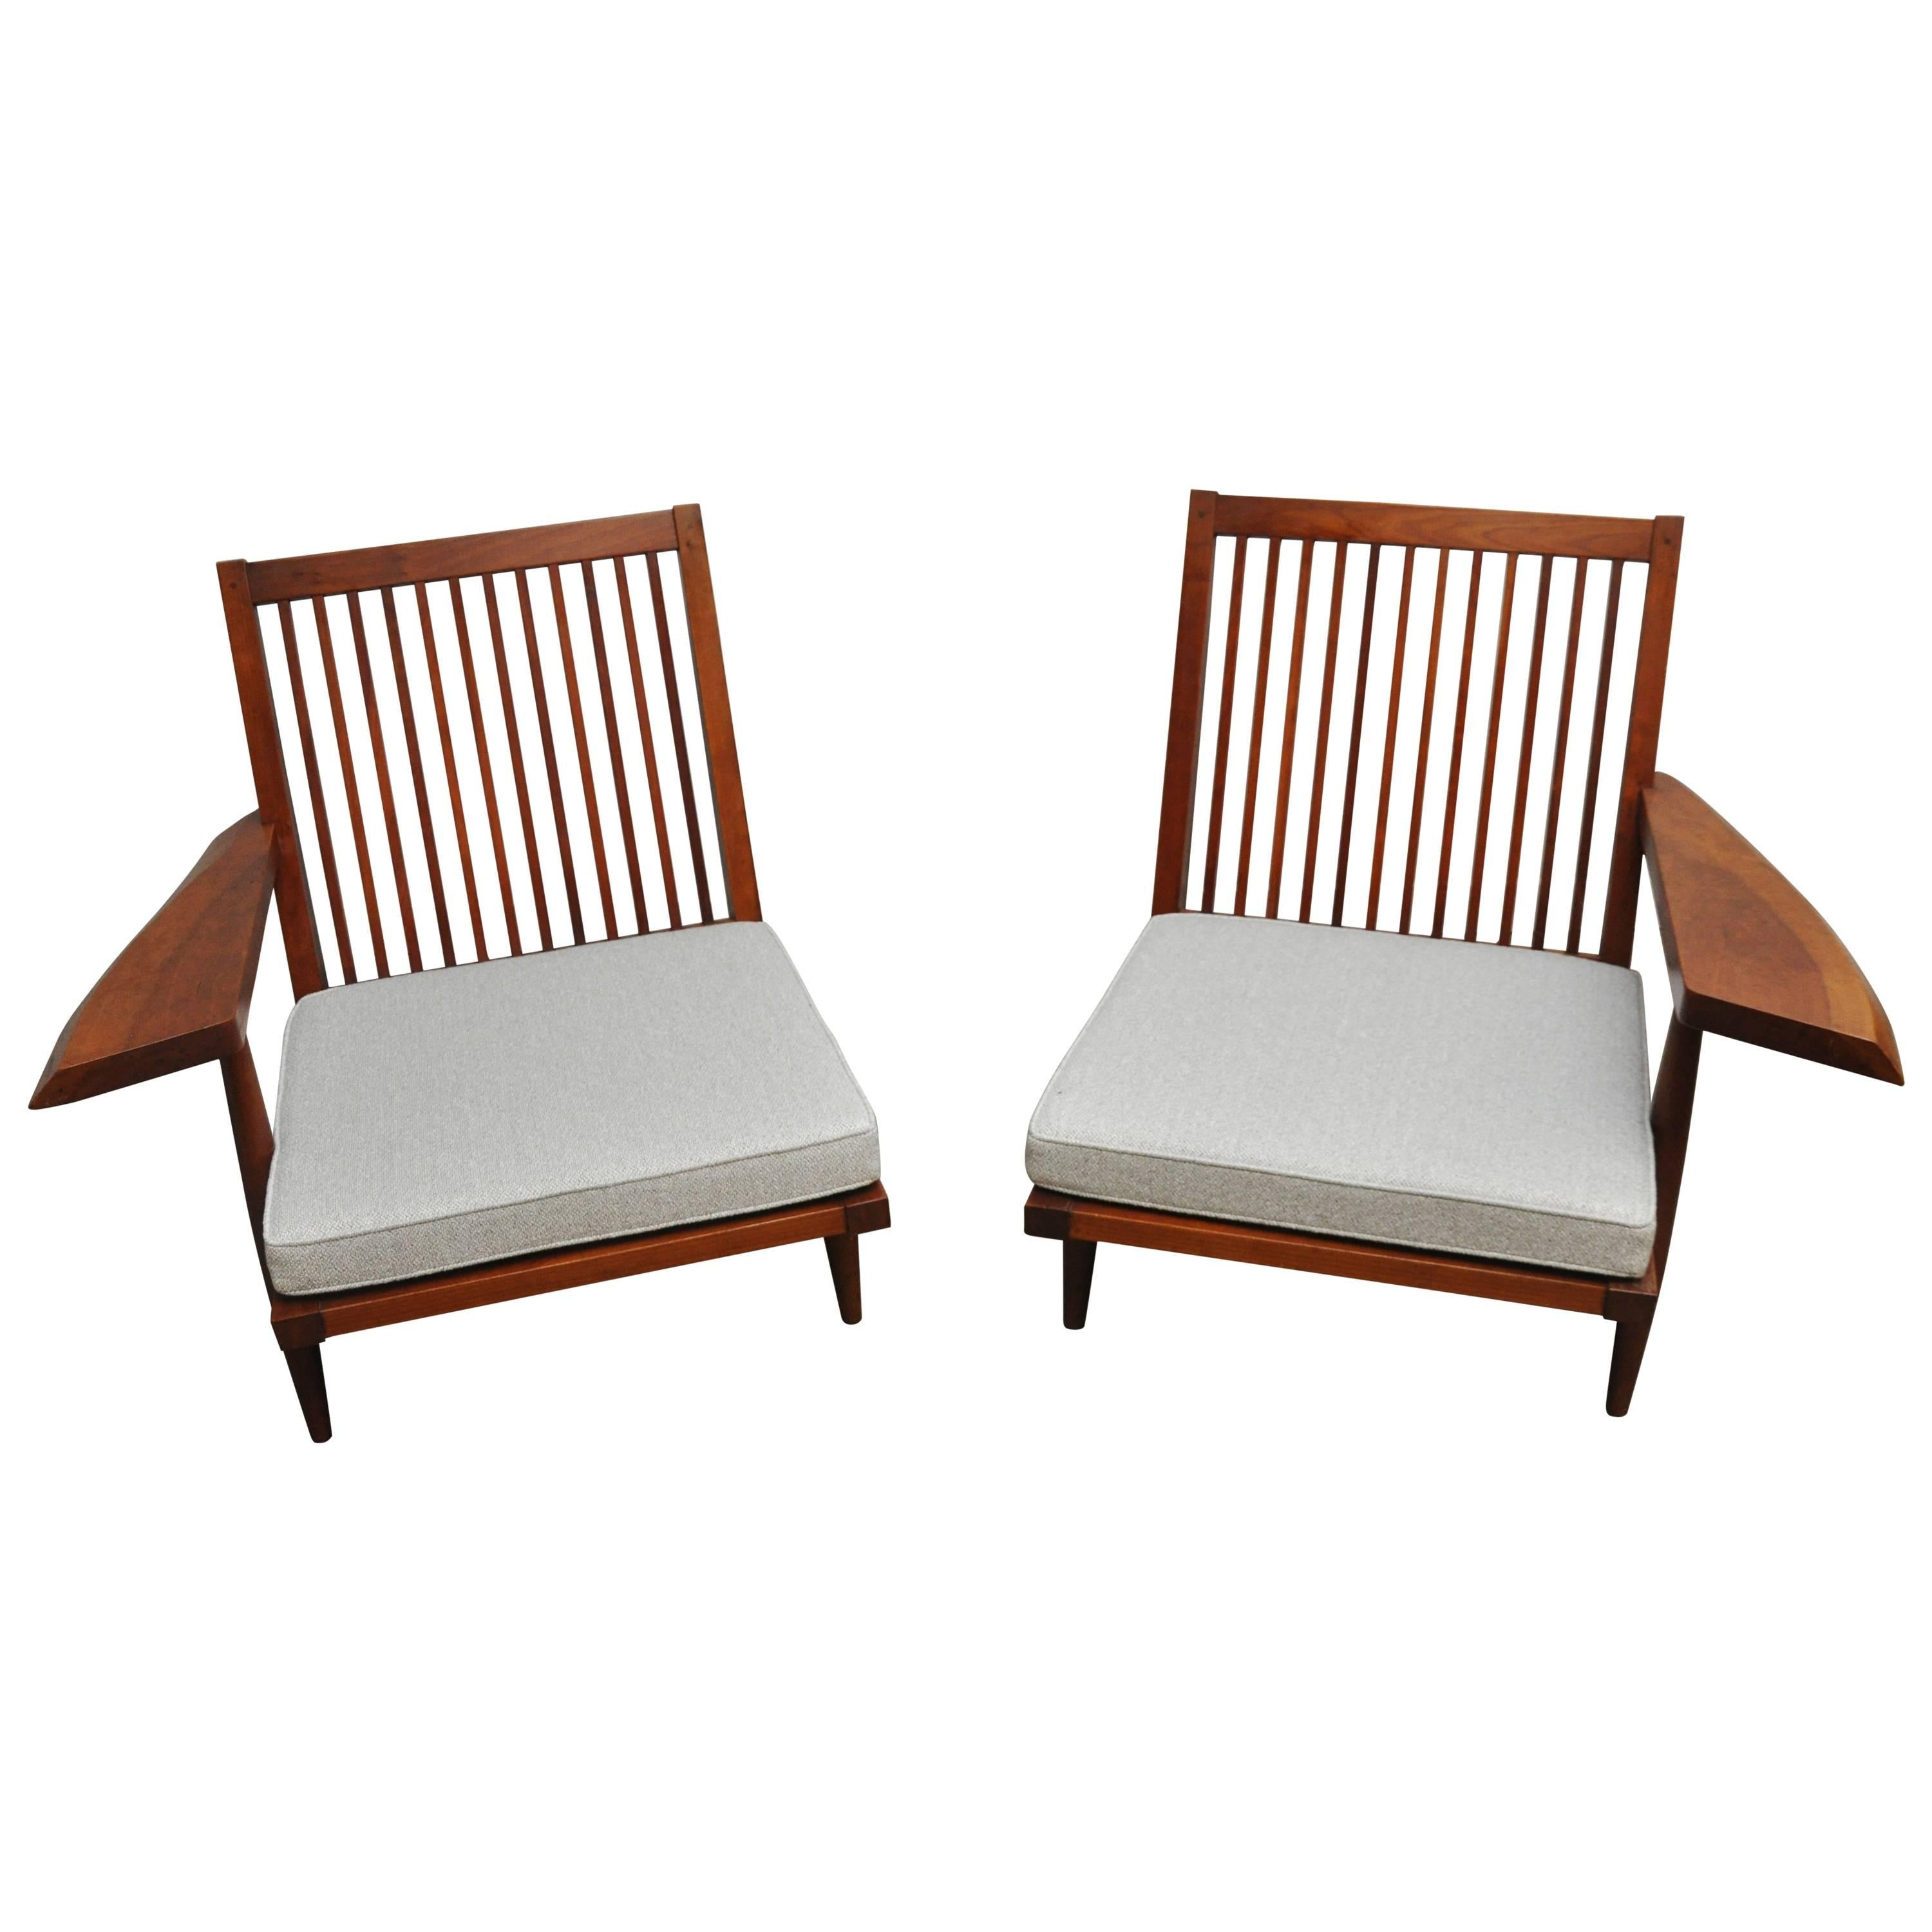 Rare custom ordered pair of cherry spindle back lounge chairs with live edge arms by George Nakashima, circa 1955 with provenance and original receipt. New cushions.